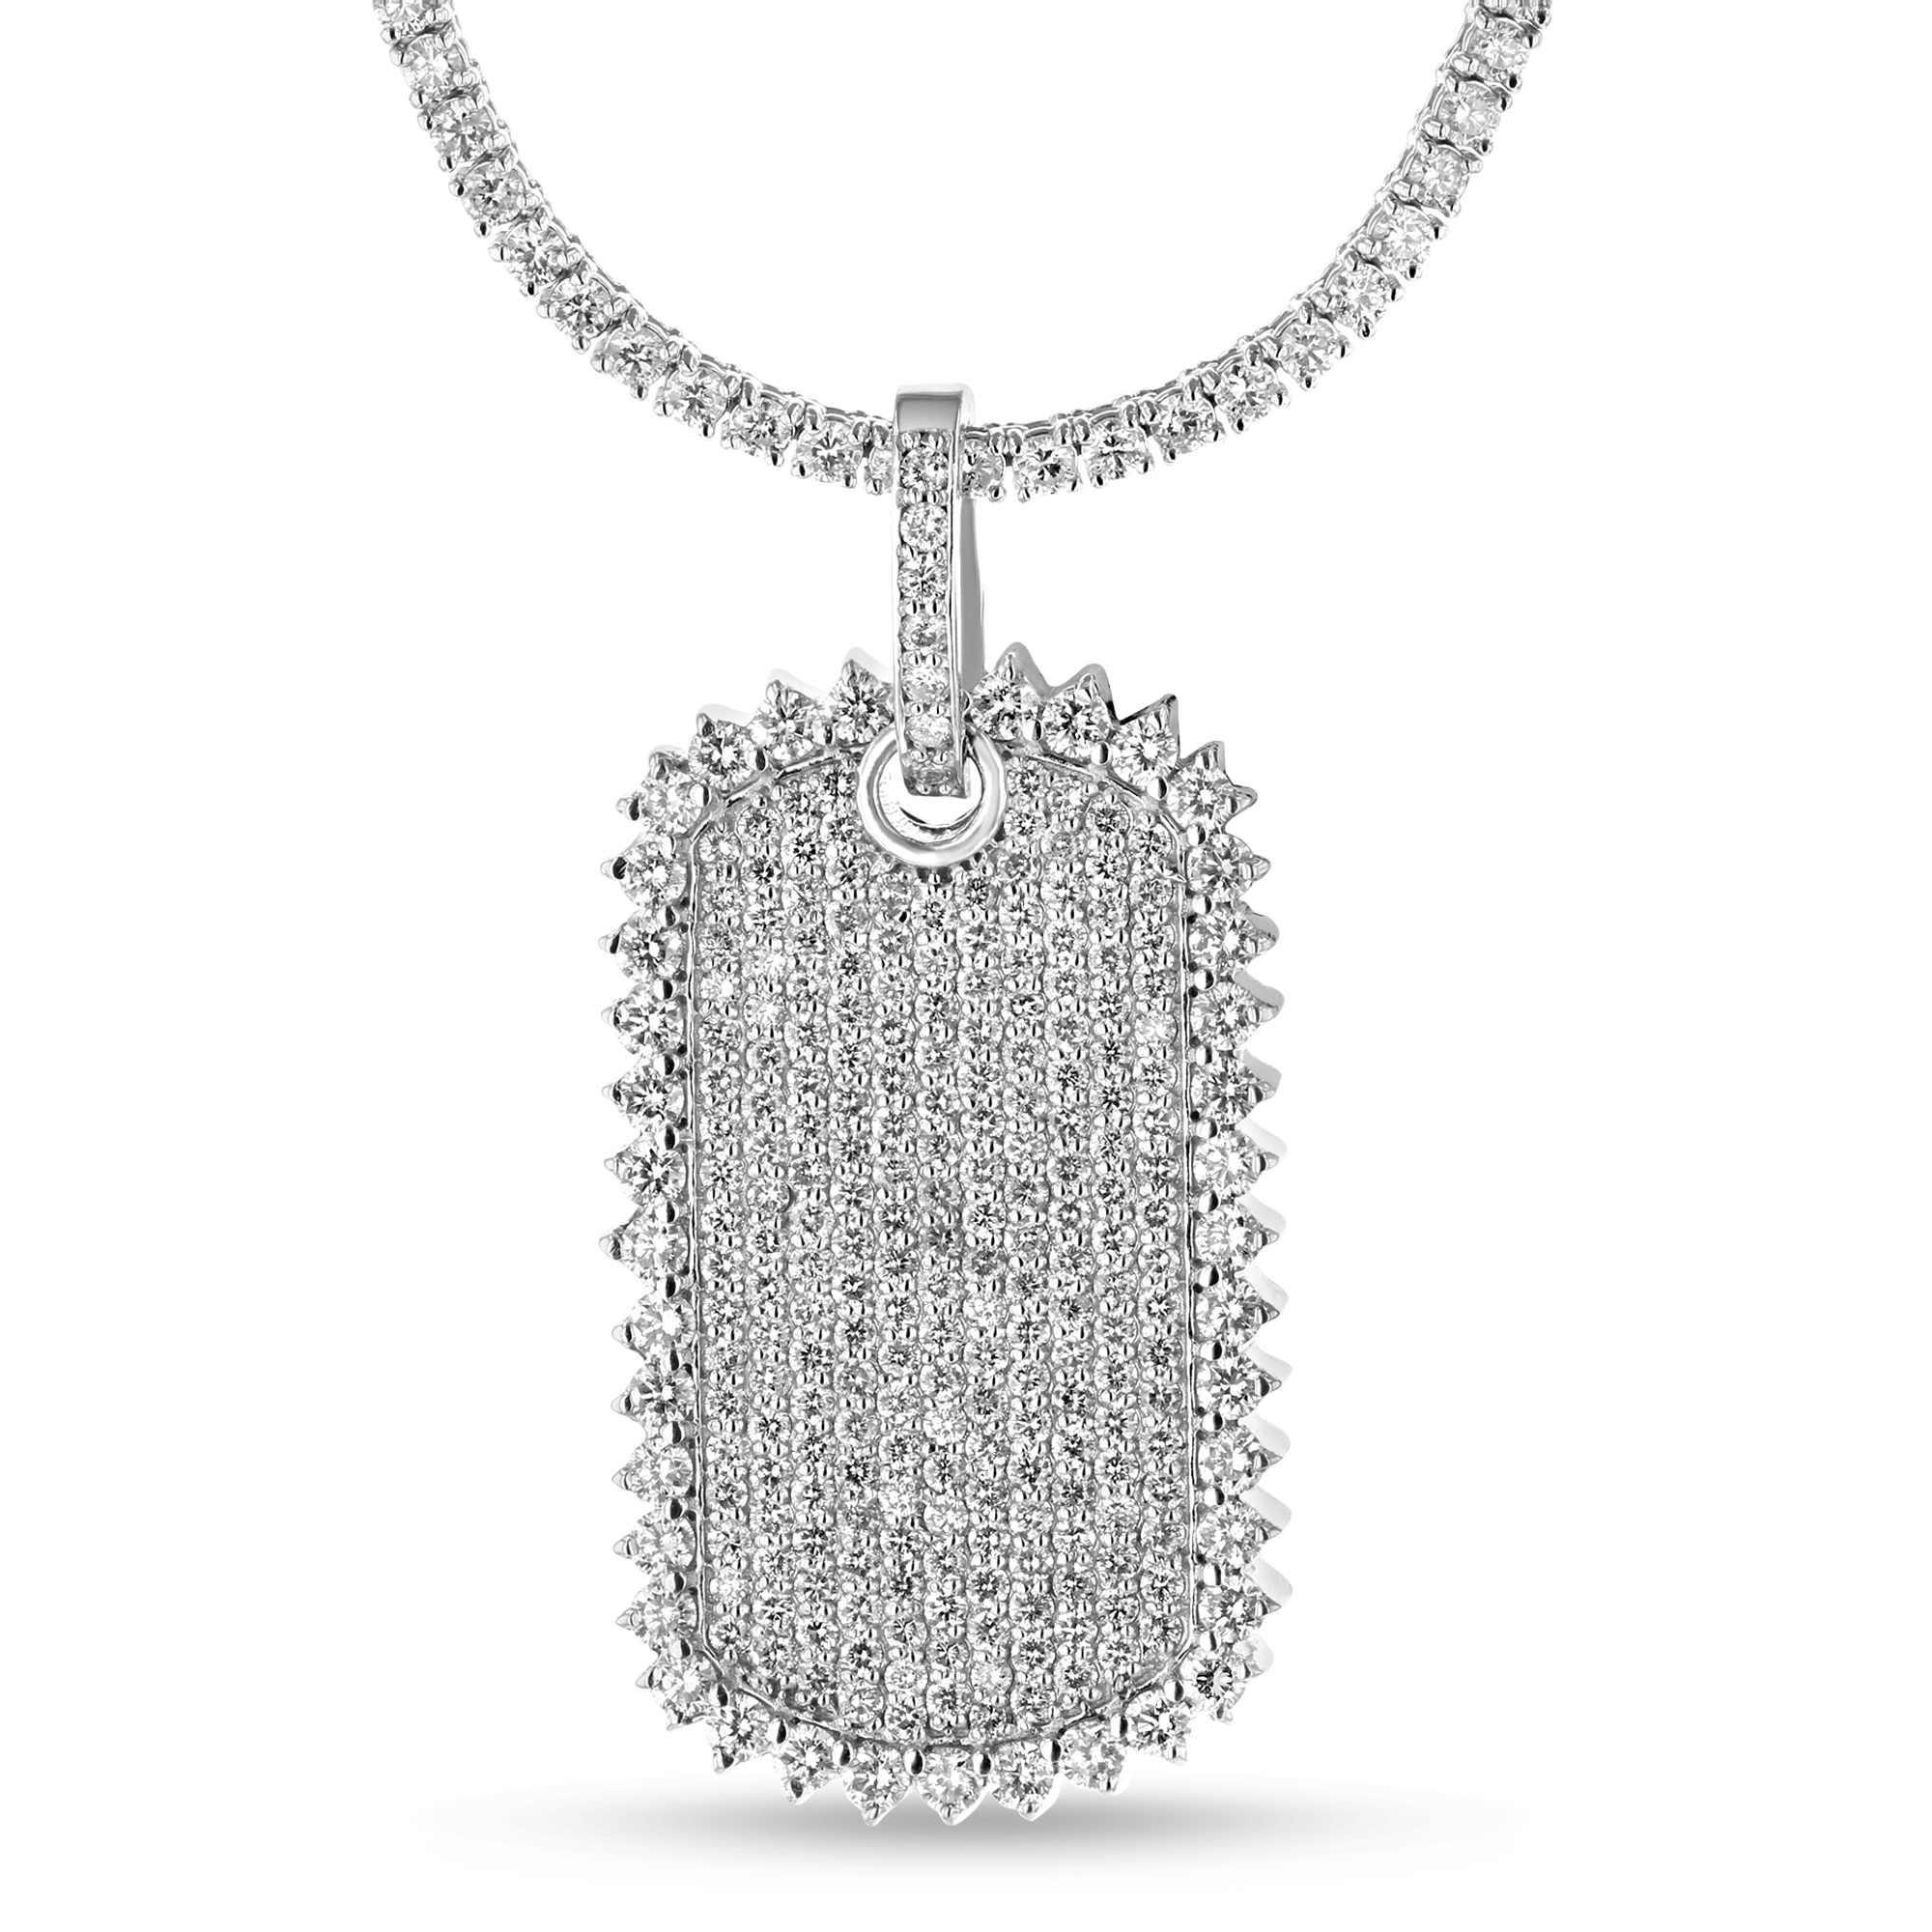 View 12.75ctw Diamond Dog Tag Necklace in 14k White Gold